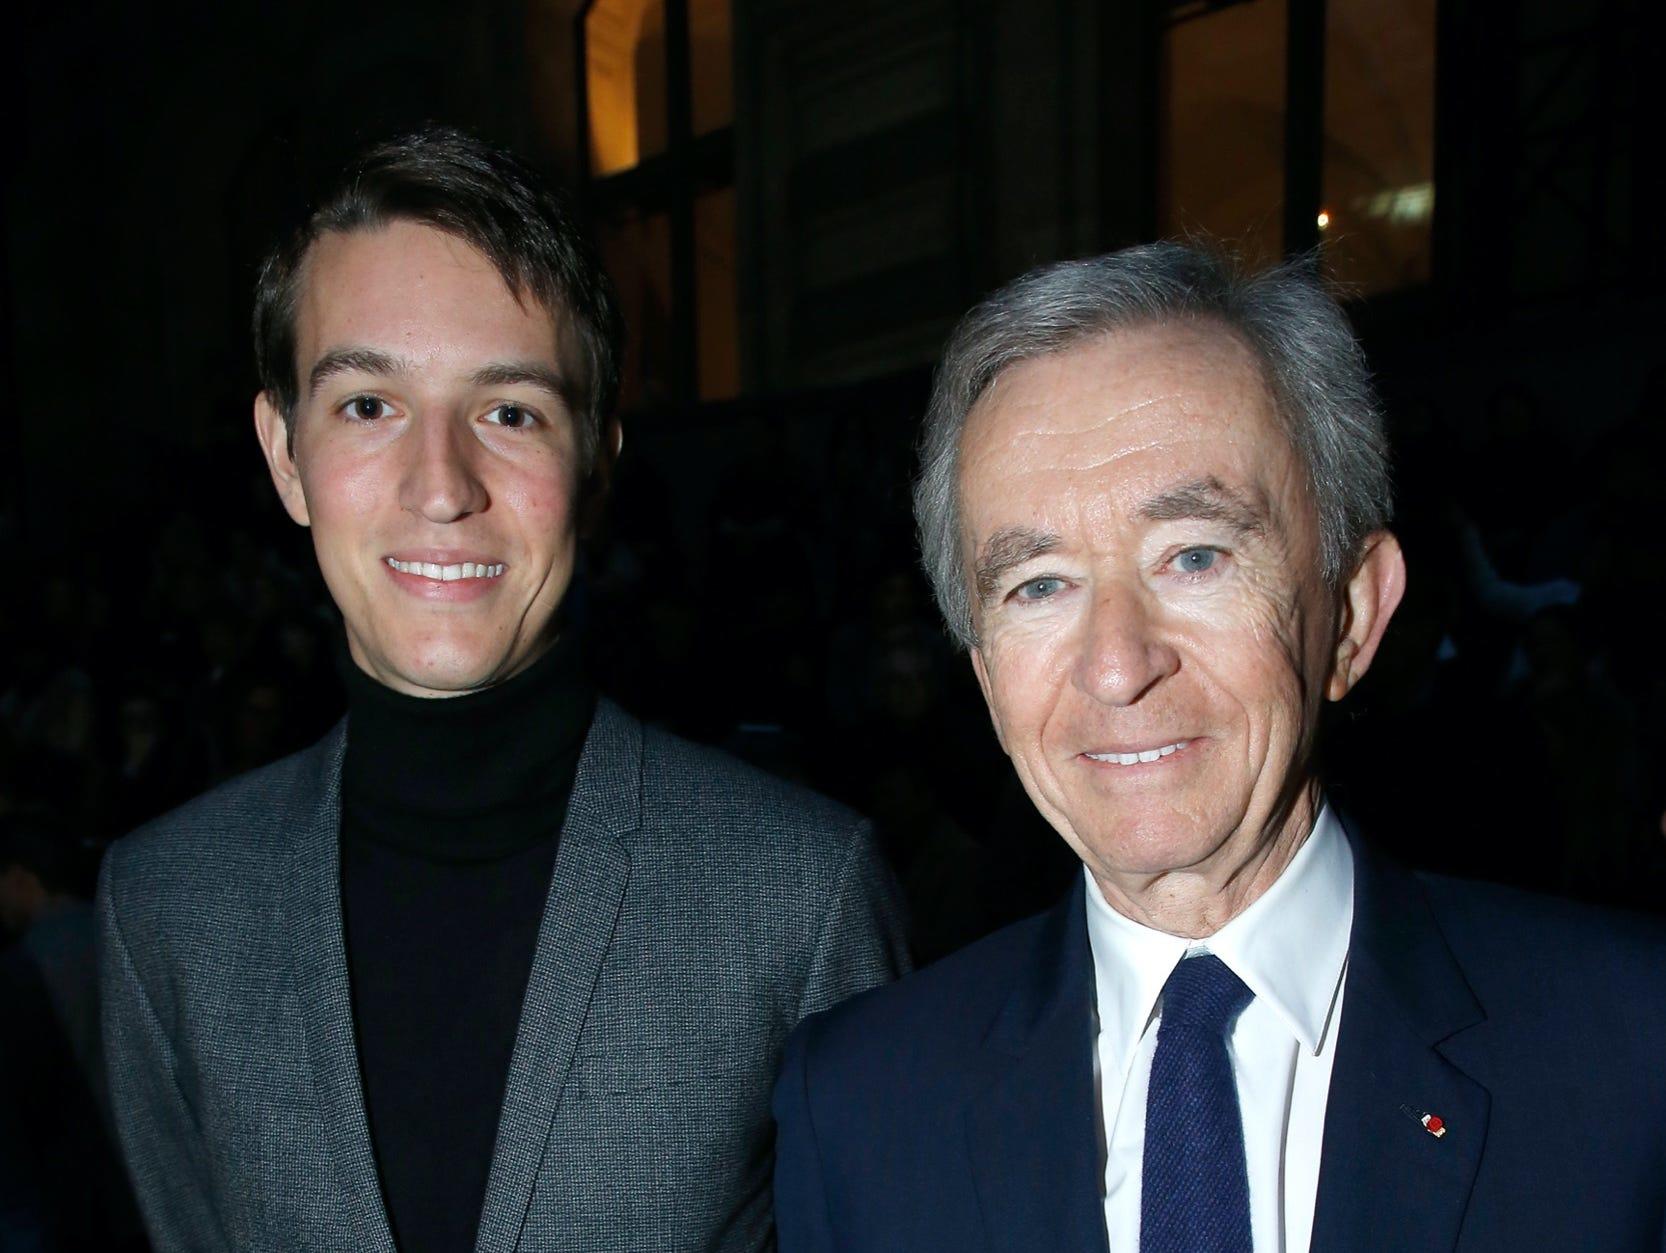 Bernard Arnault to auditions his children: A Glimpse into